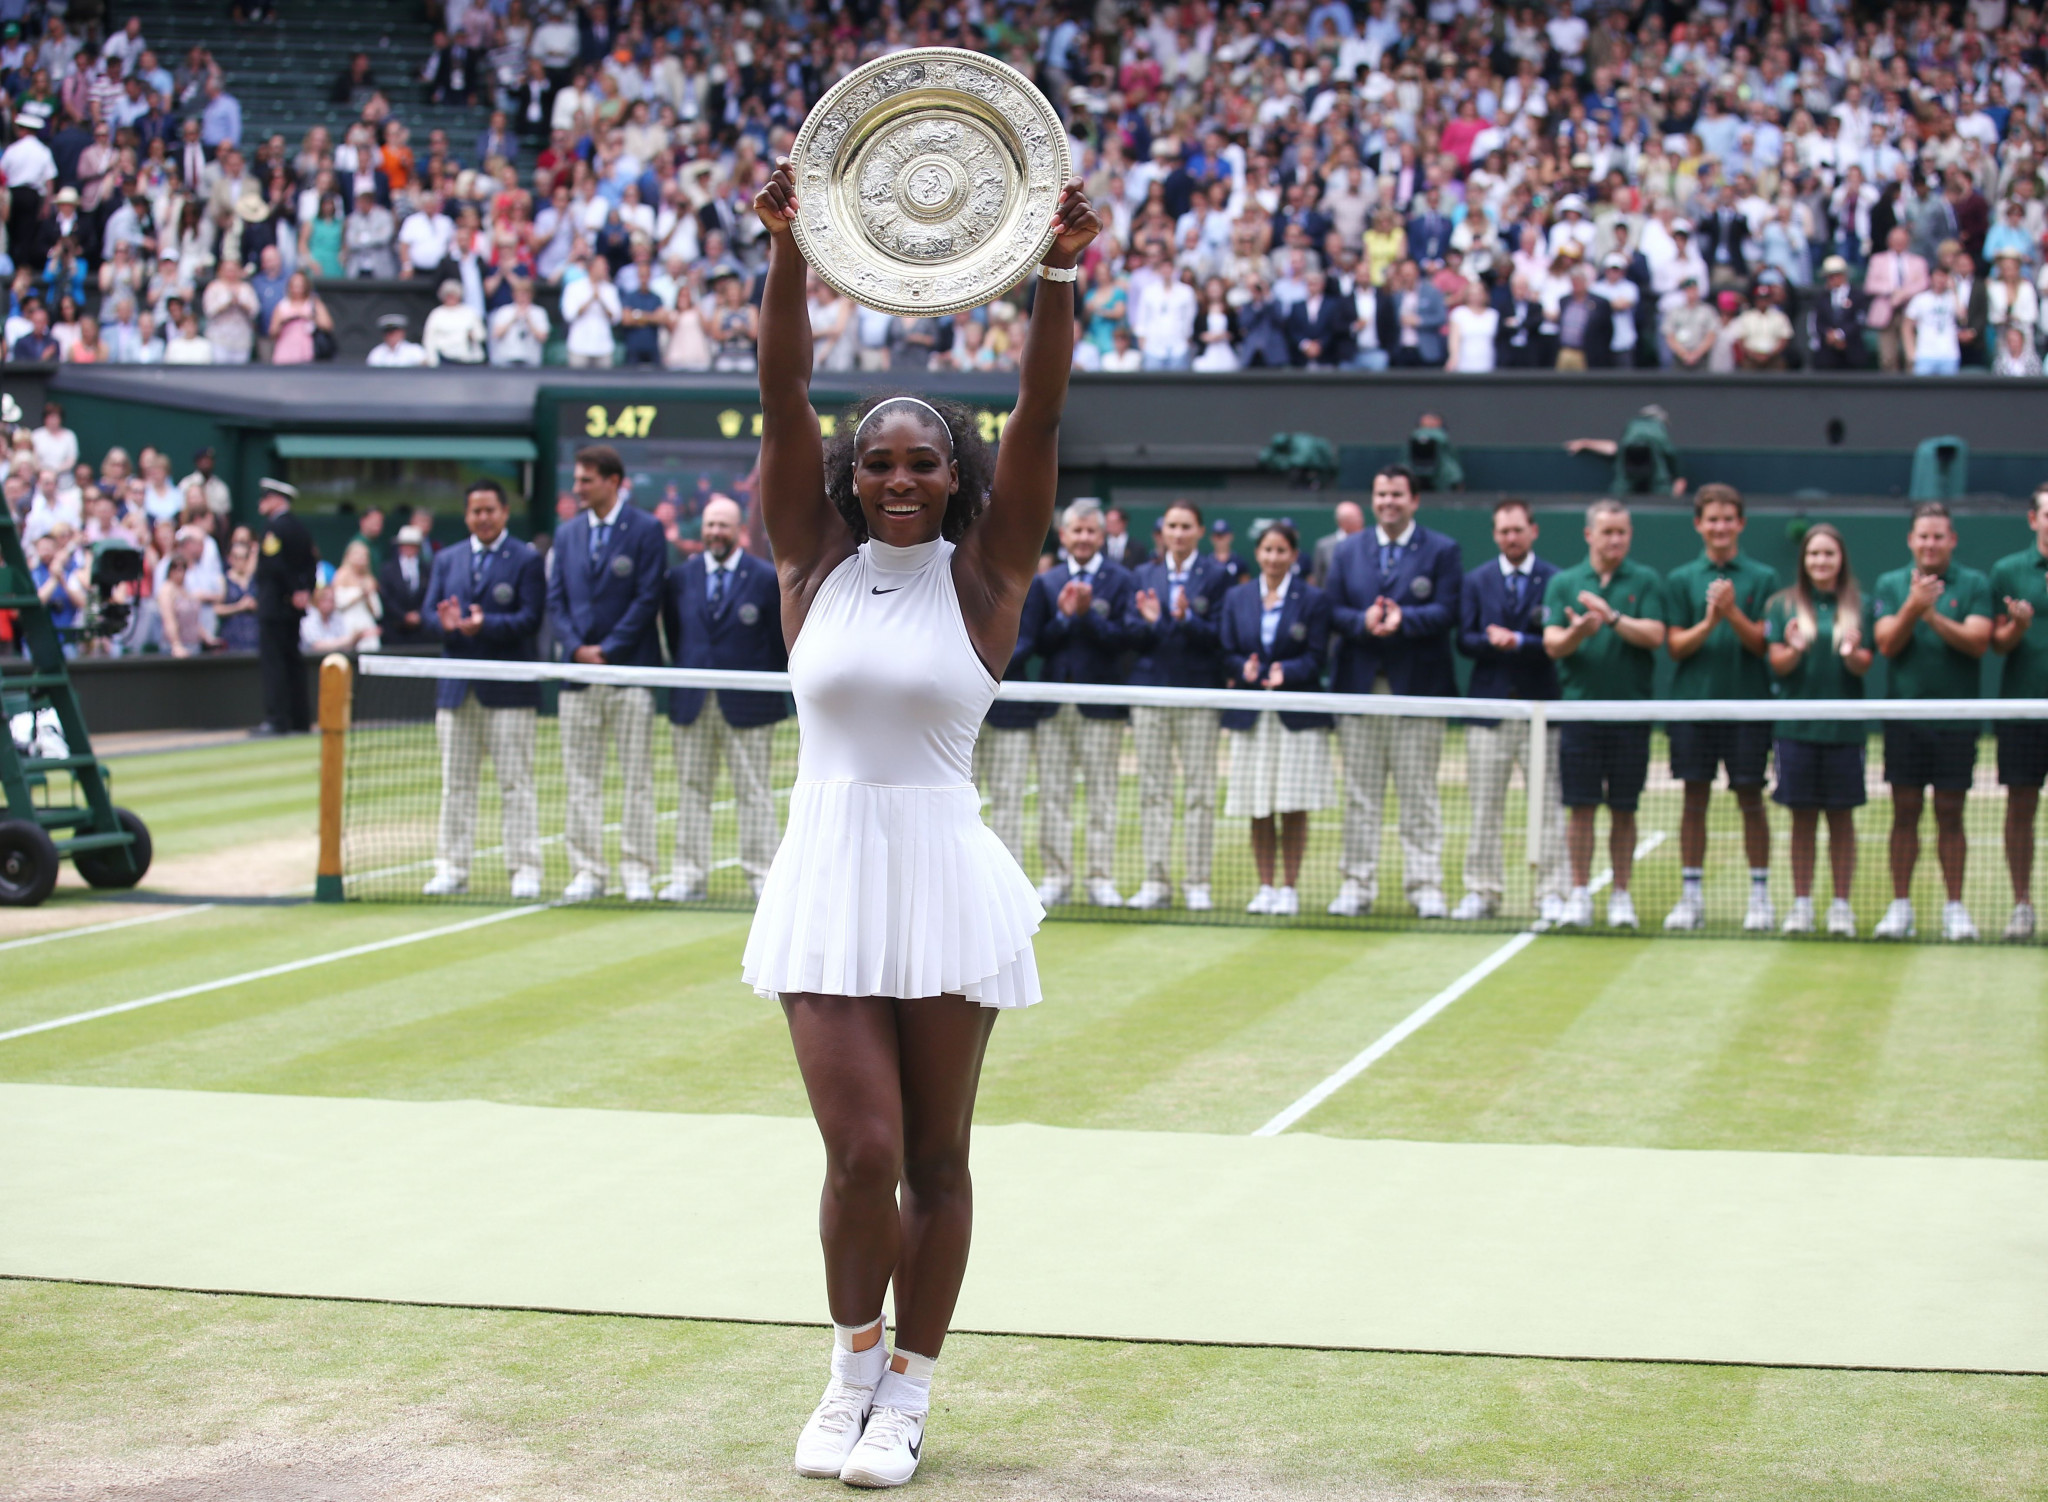 Defending champion Serena Williams returns this year with a world ranking of 181 ©Getty Images